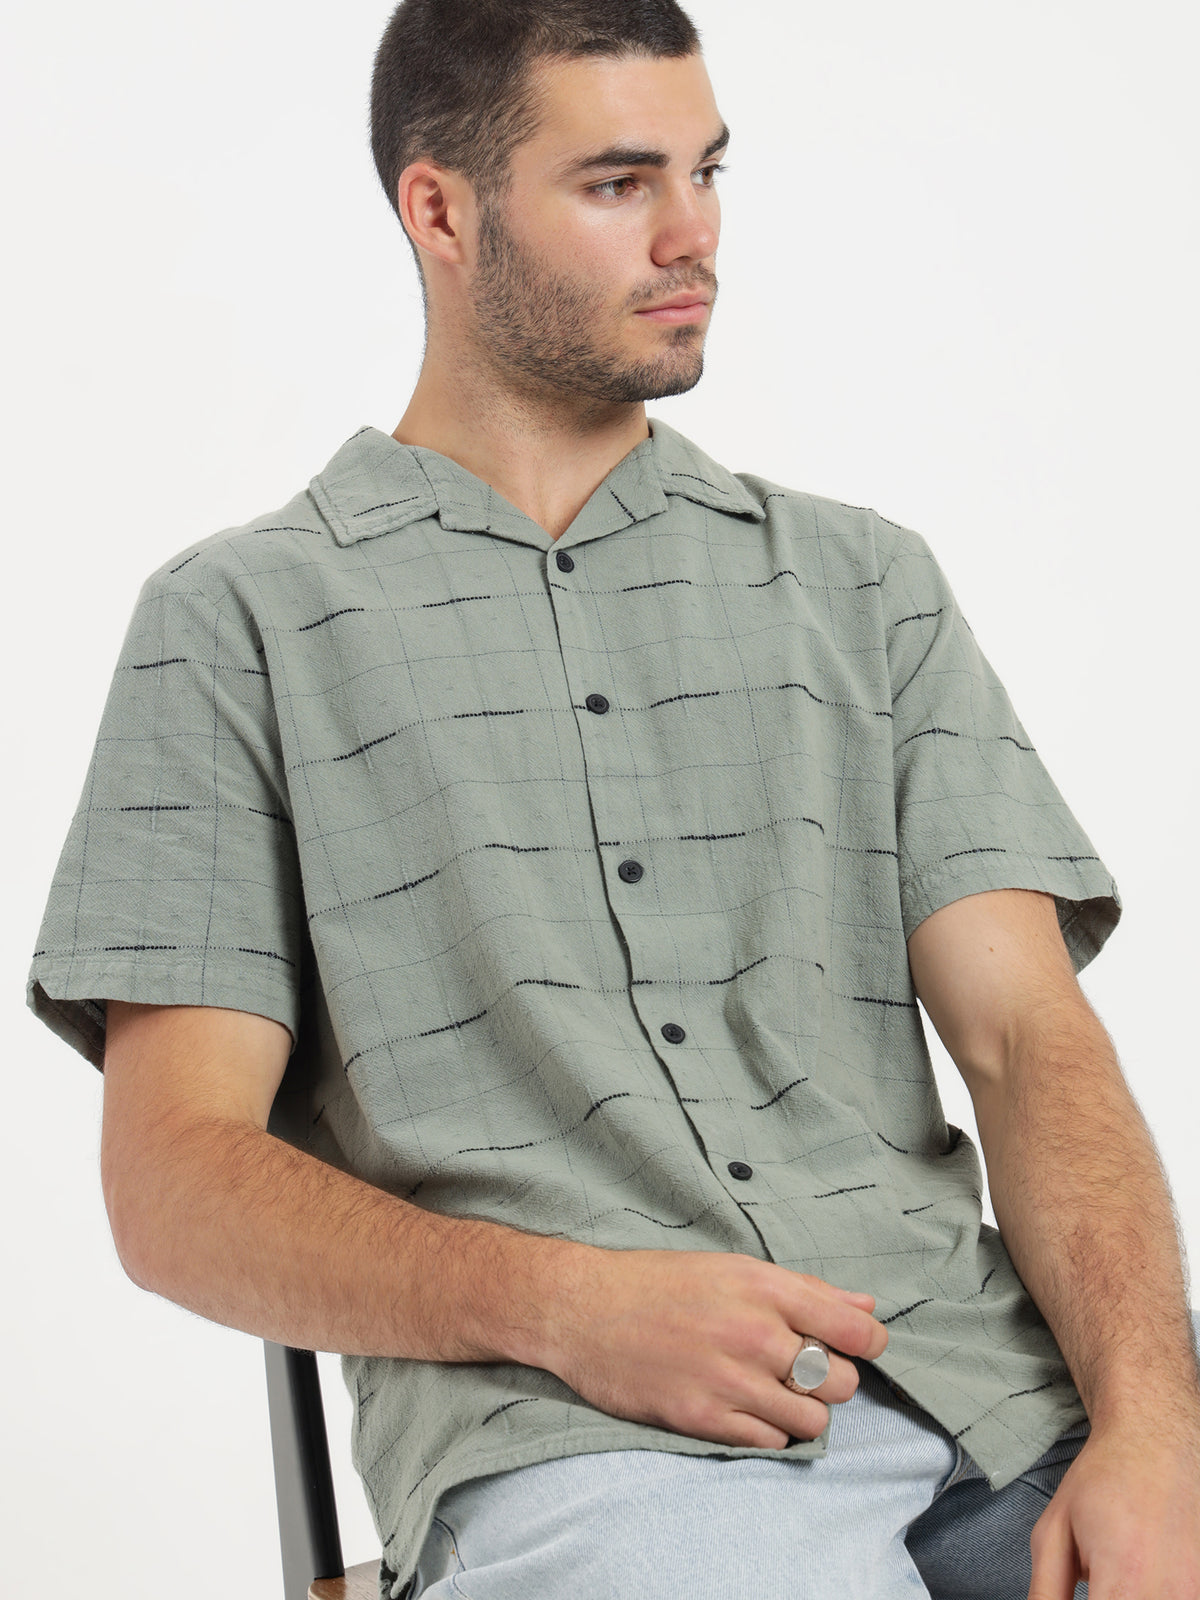 Enlightenment Bowling Shirt in Sea Glass